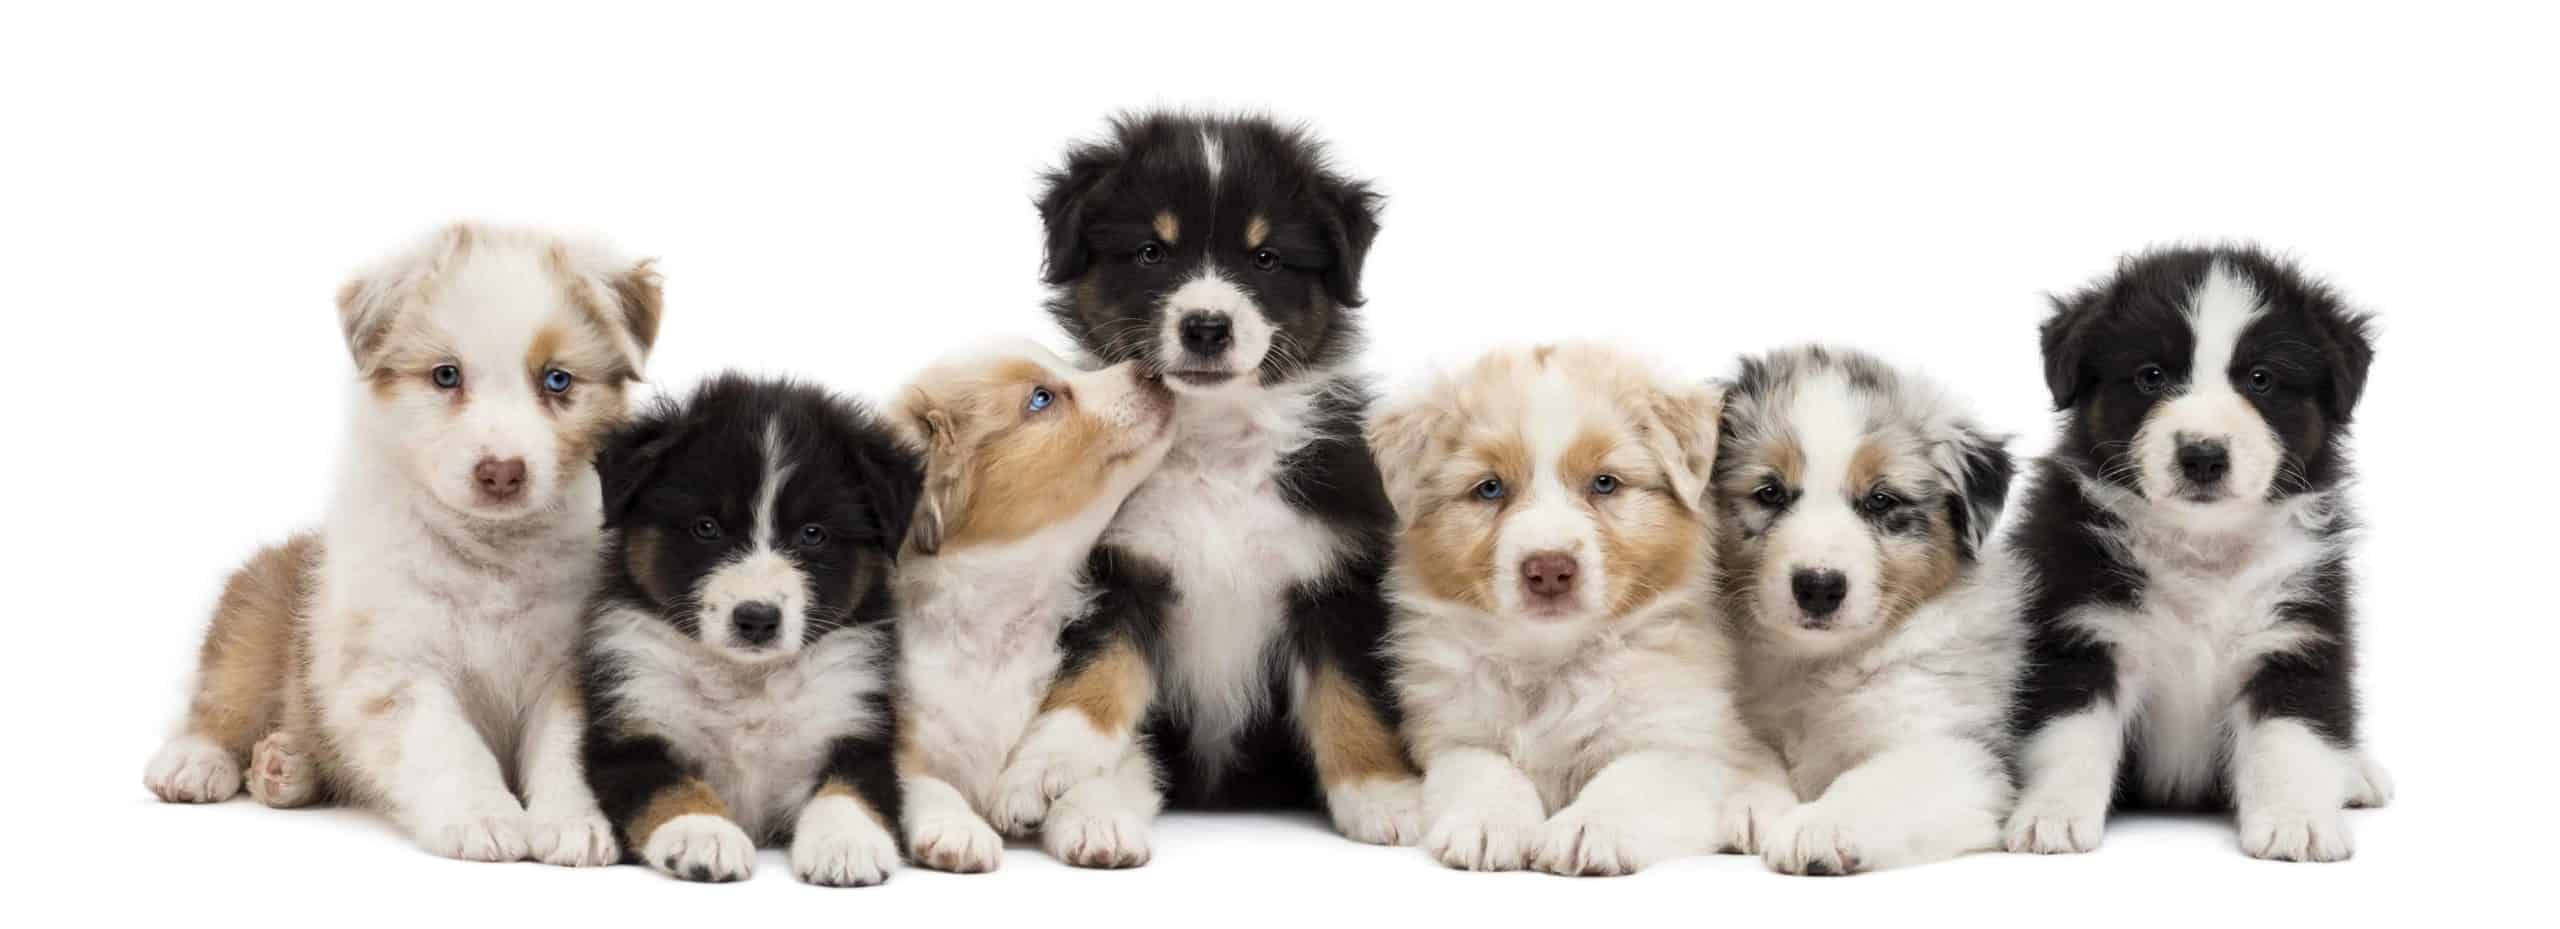 Group of Australian Shepherd puppies. Mid-size dog breeds like Australian shepherds are as energetic as small dogs and as loving as big dogs. They vary in activity level, temperament, and trainability.